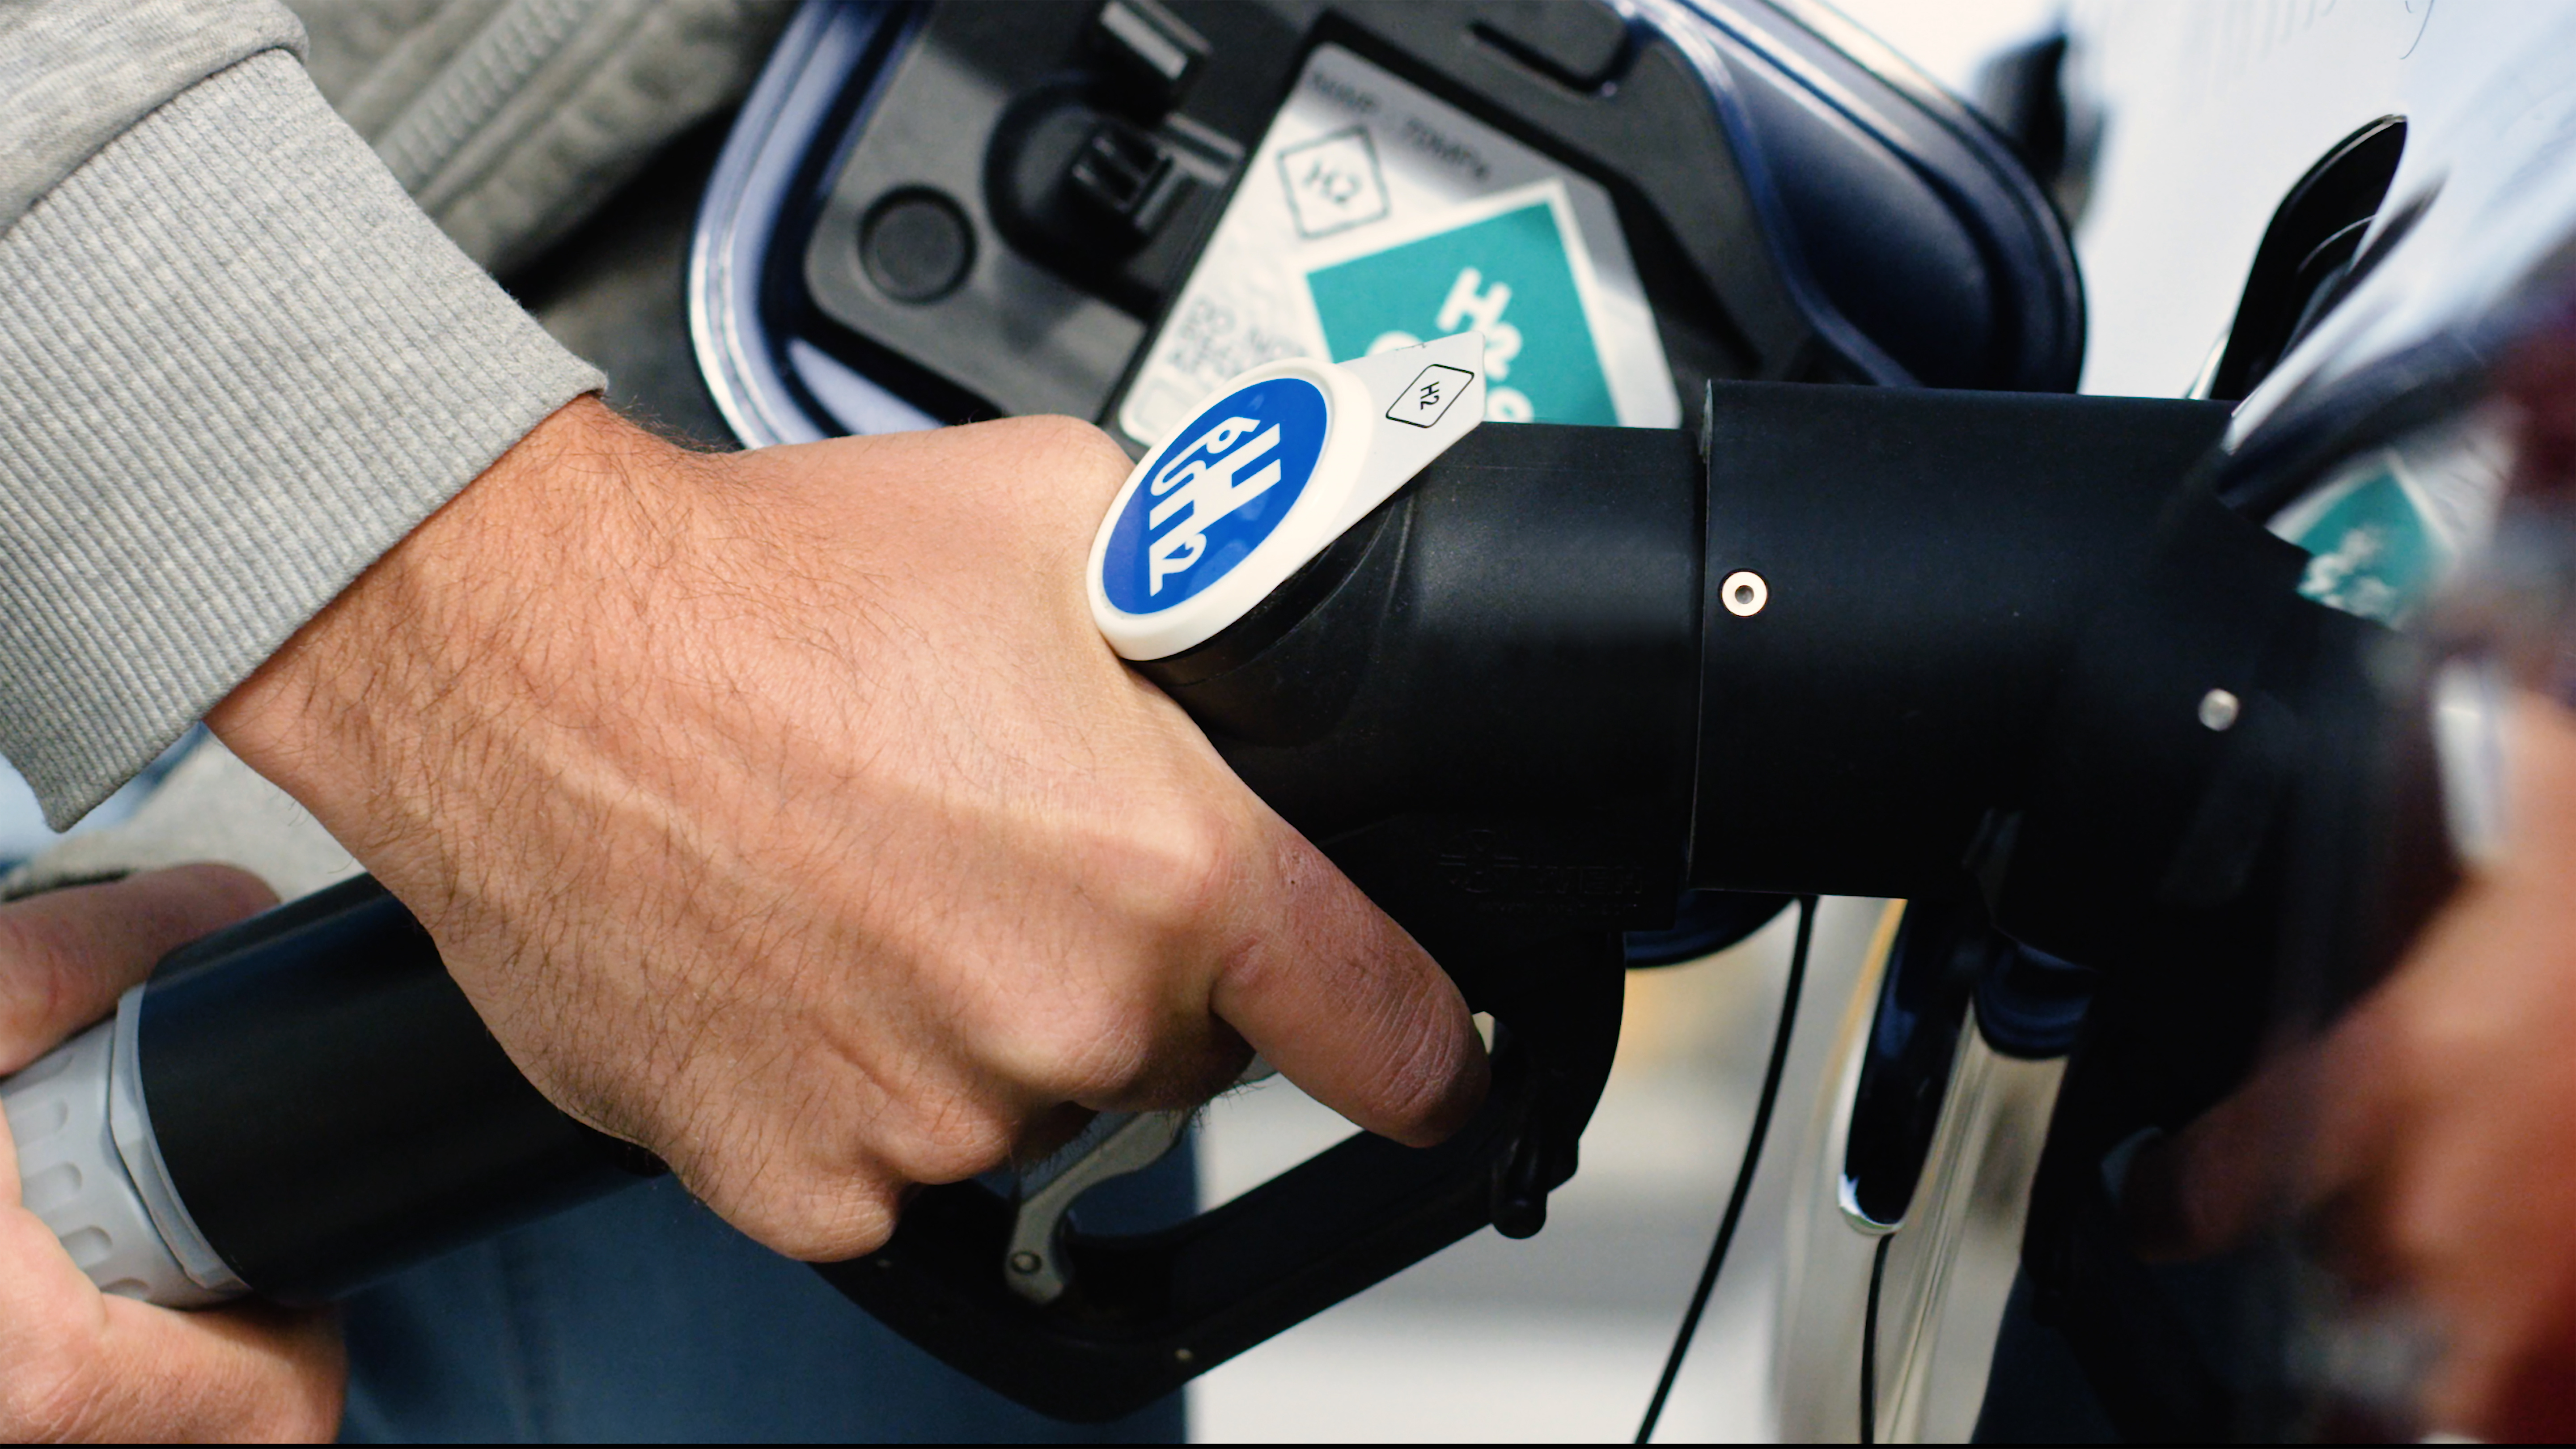 A driver refills the hydrogen fuel for their vehicle.